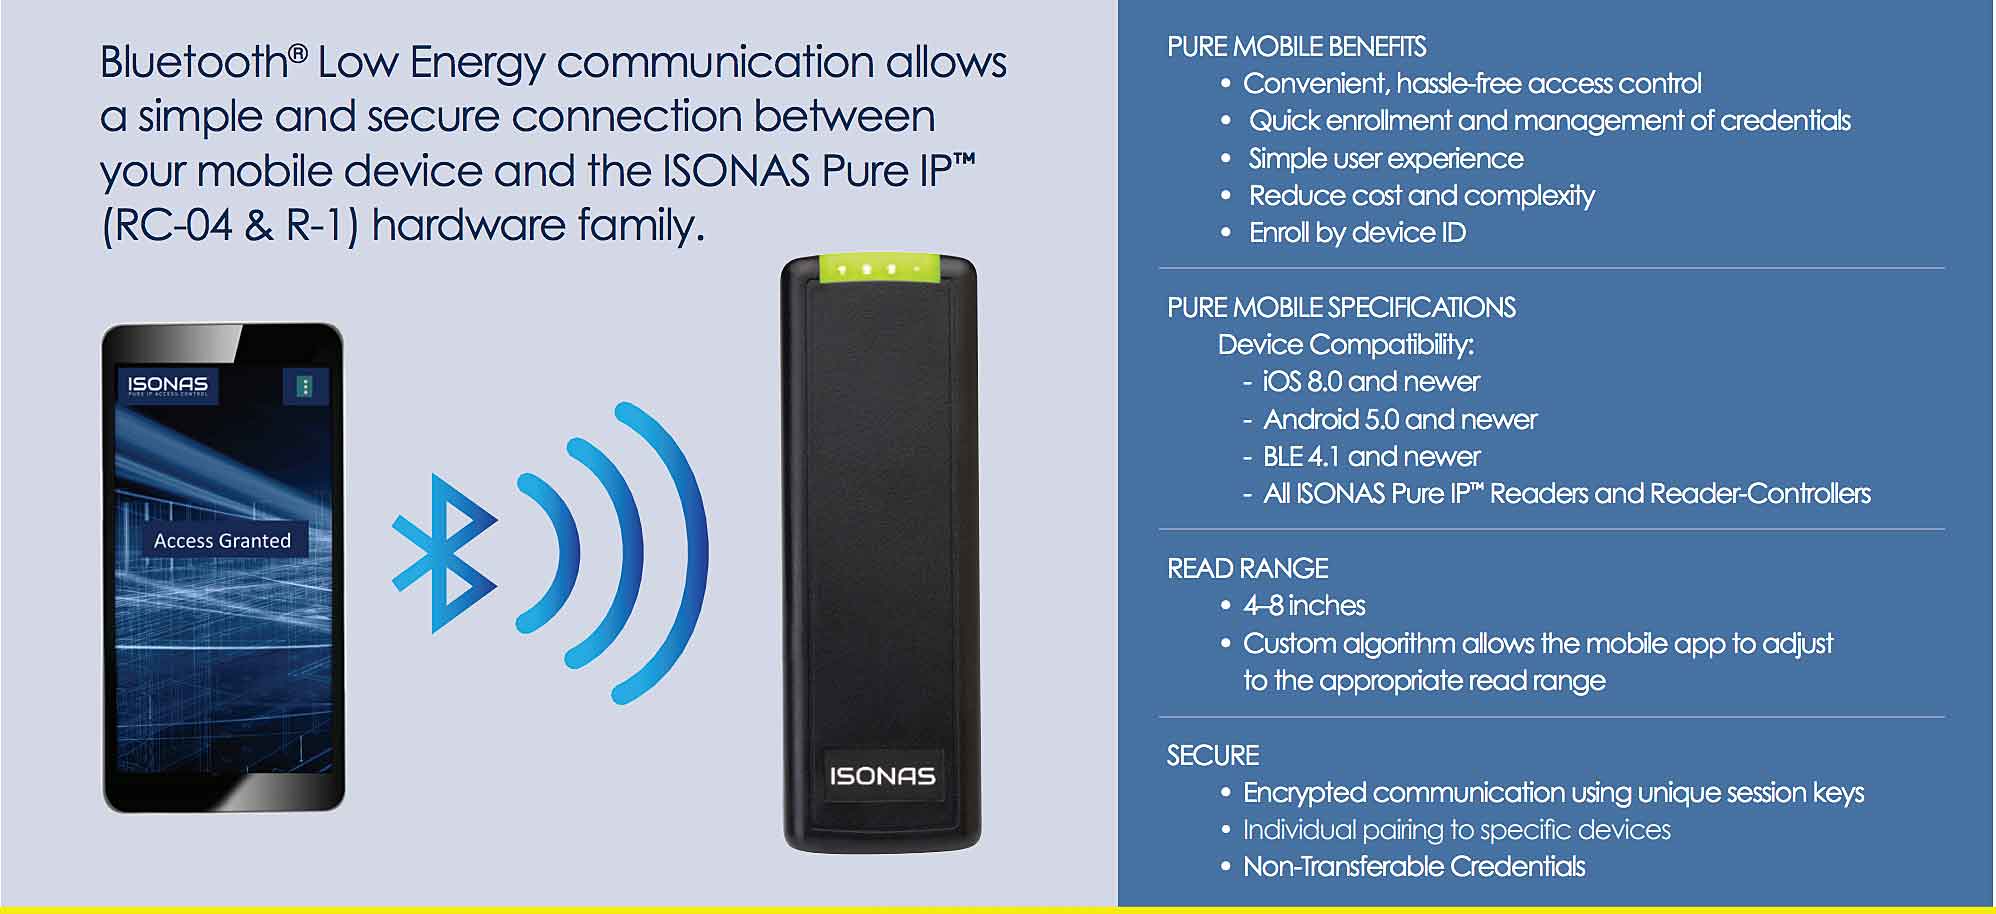 ISONAS' new credentials, Pure Mobile, allow consumers to take the convenience of their mobile phone to the next level - and turn access control into a simple, hassle free part of their day.